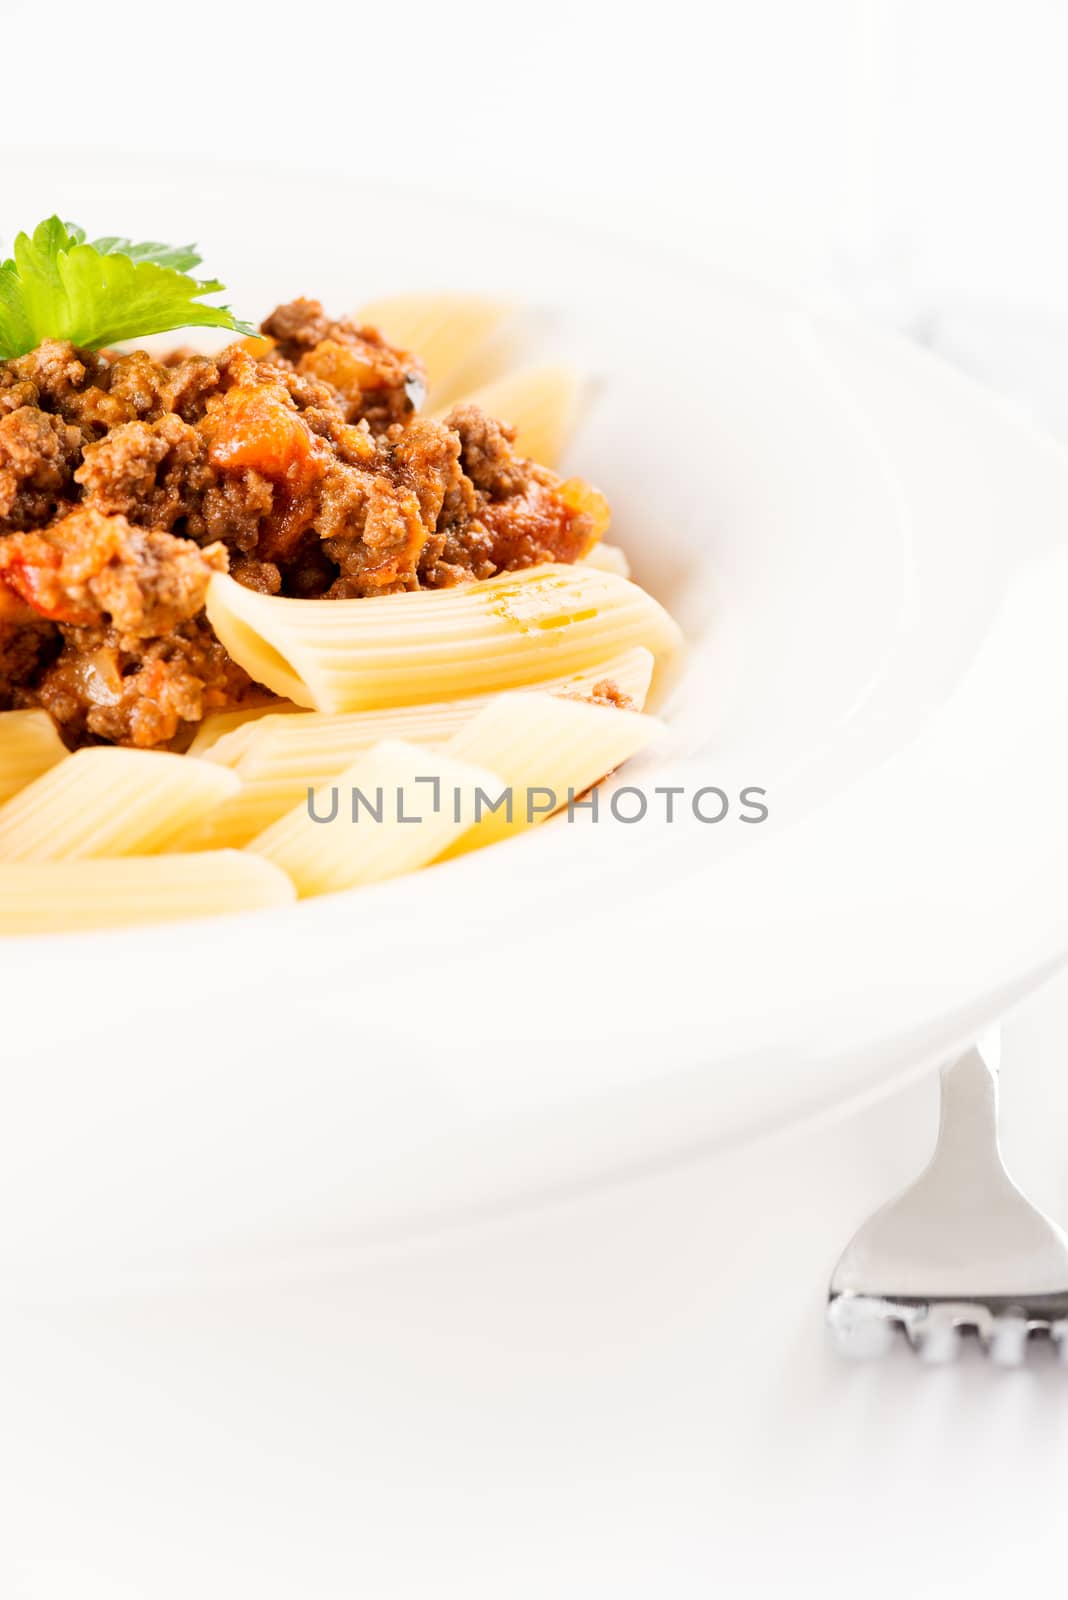 Pasta. Penne Pasta with Bolognese Sauce, Parmesan Cheese and Basil, Fork. Italian Cuisine. Mediterranean food